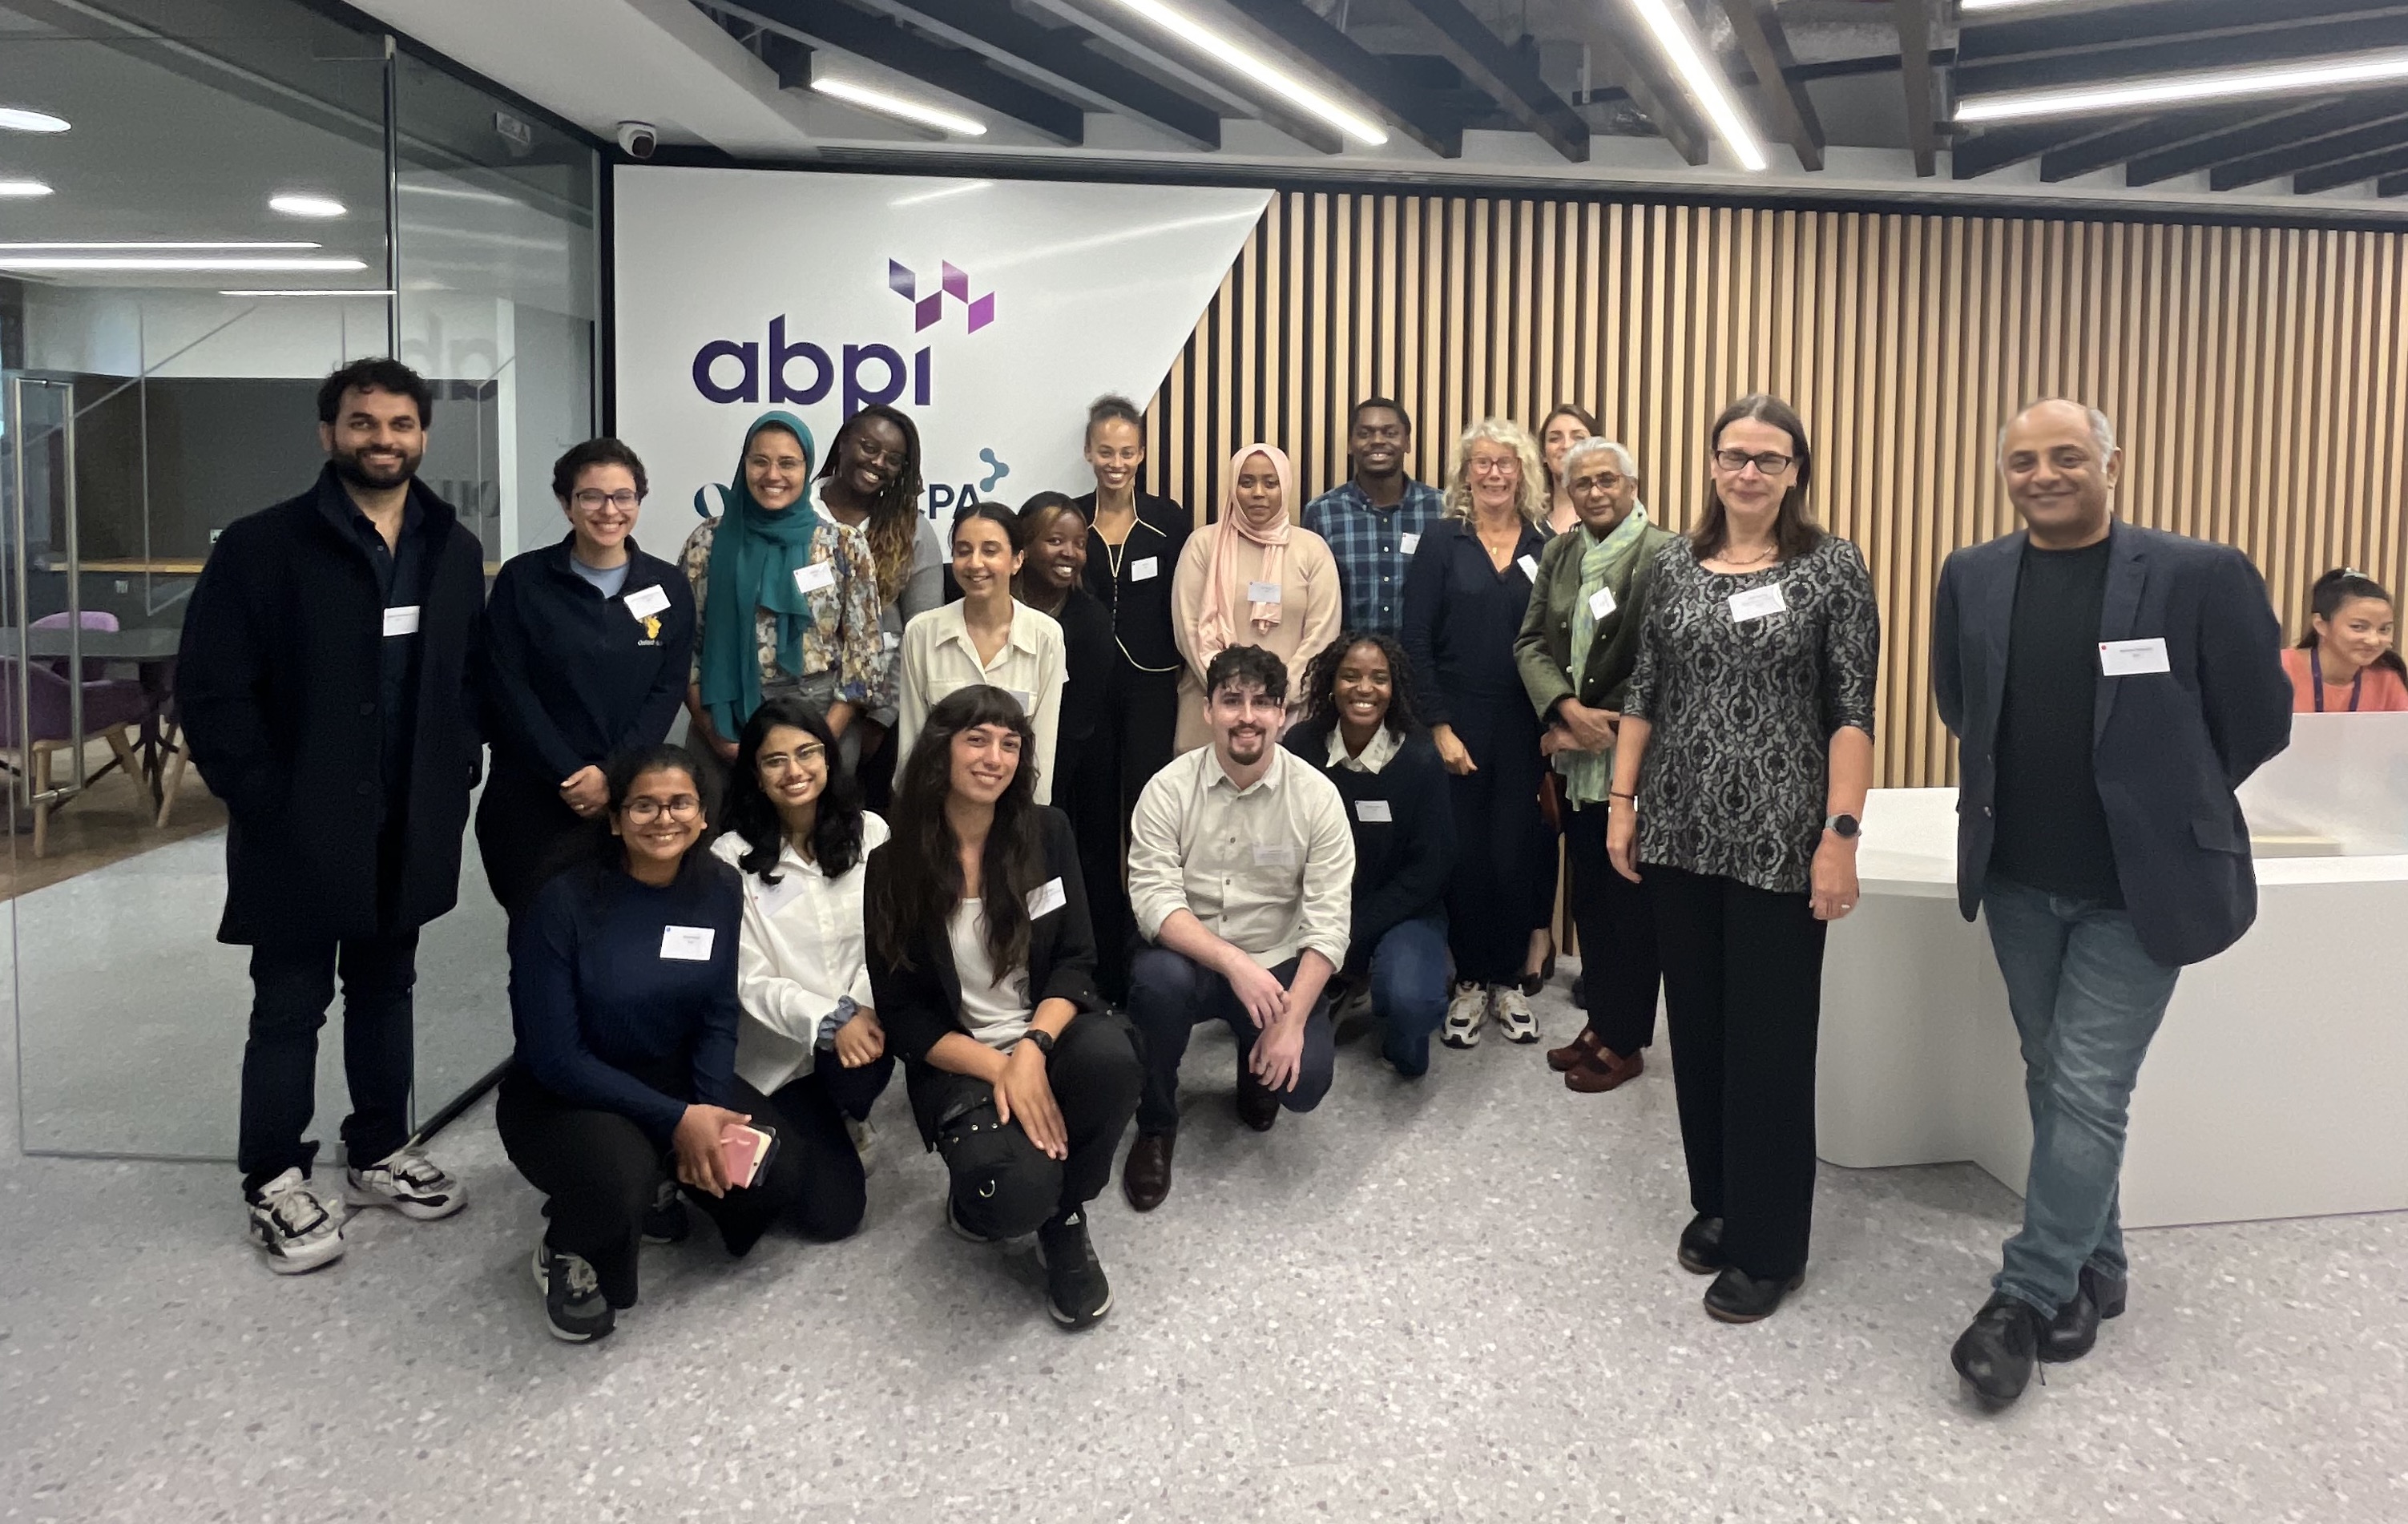 BNA Scholars at a Supporter event by ABPI